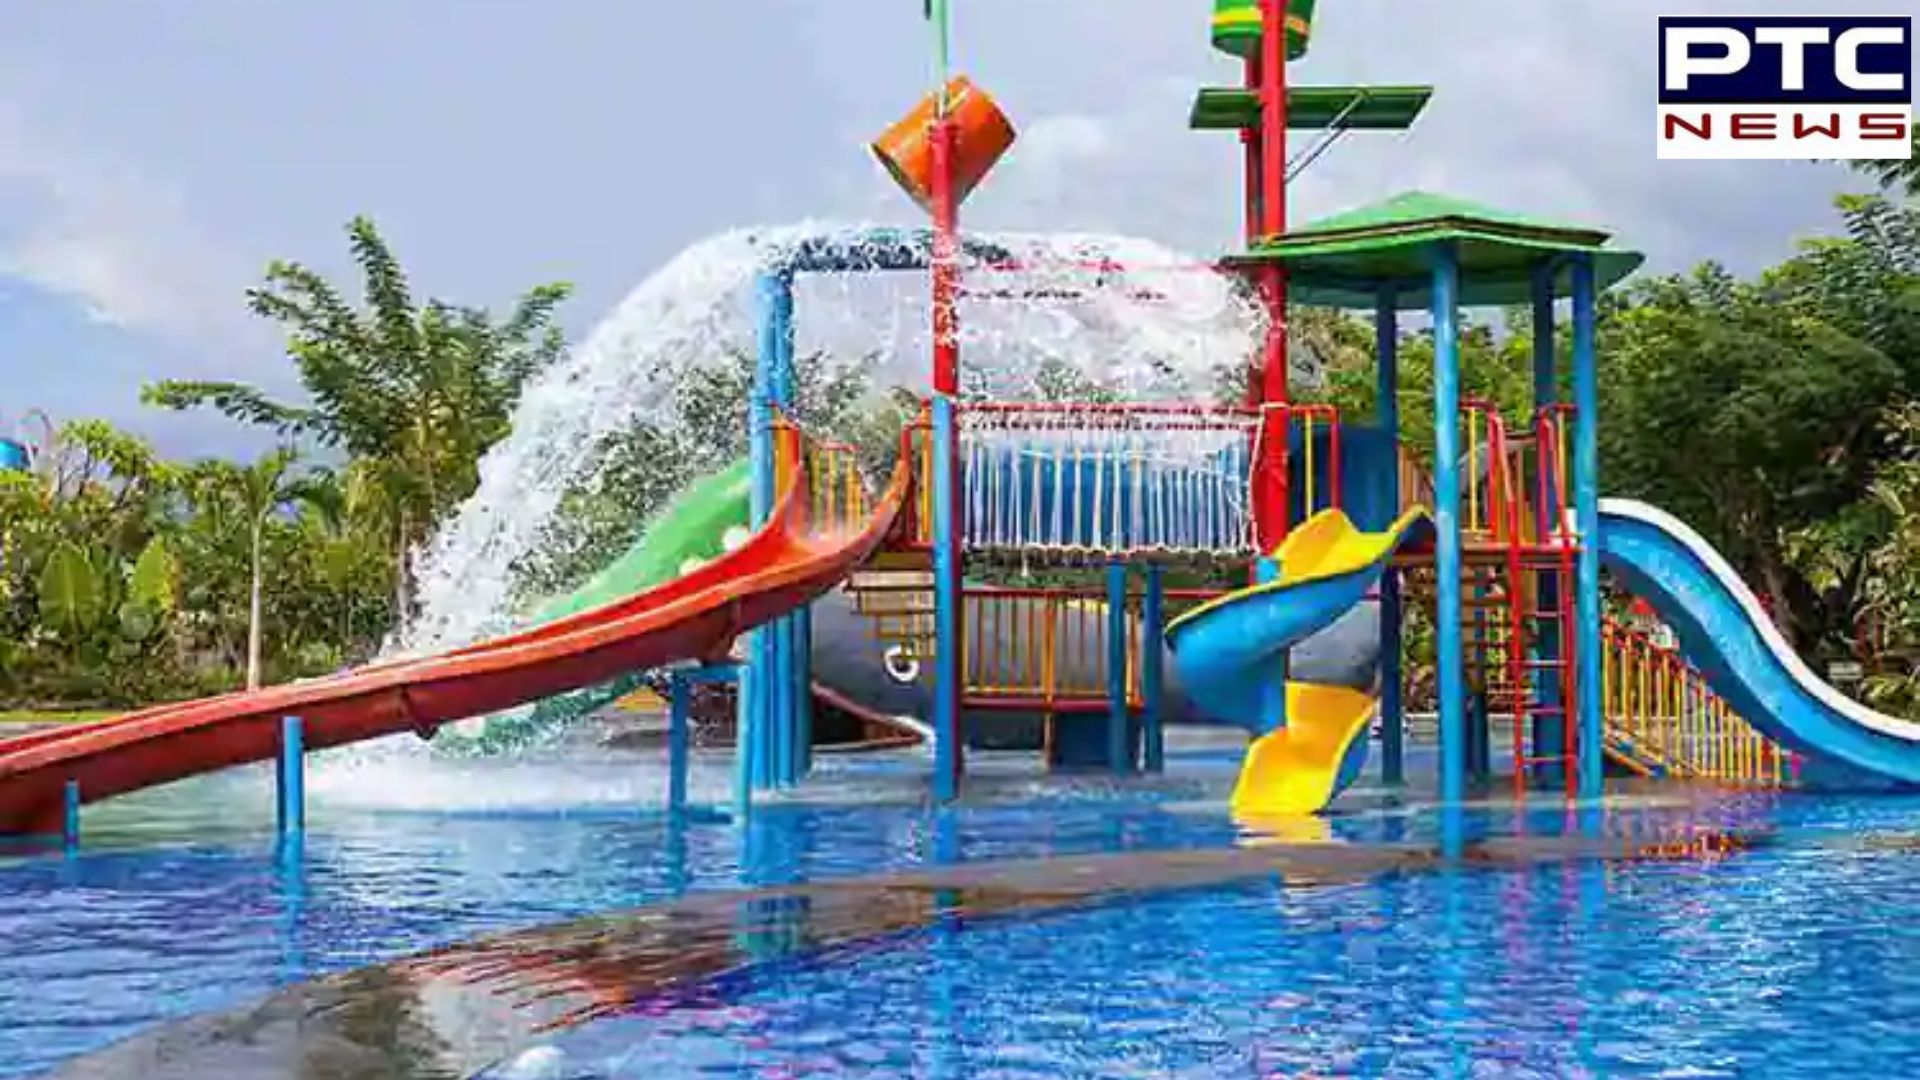 Noida tragedy: 25-year-old man dies after taking slide at a water park